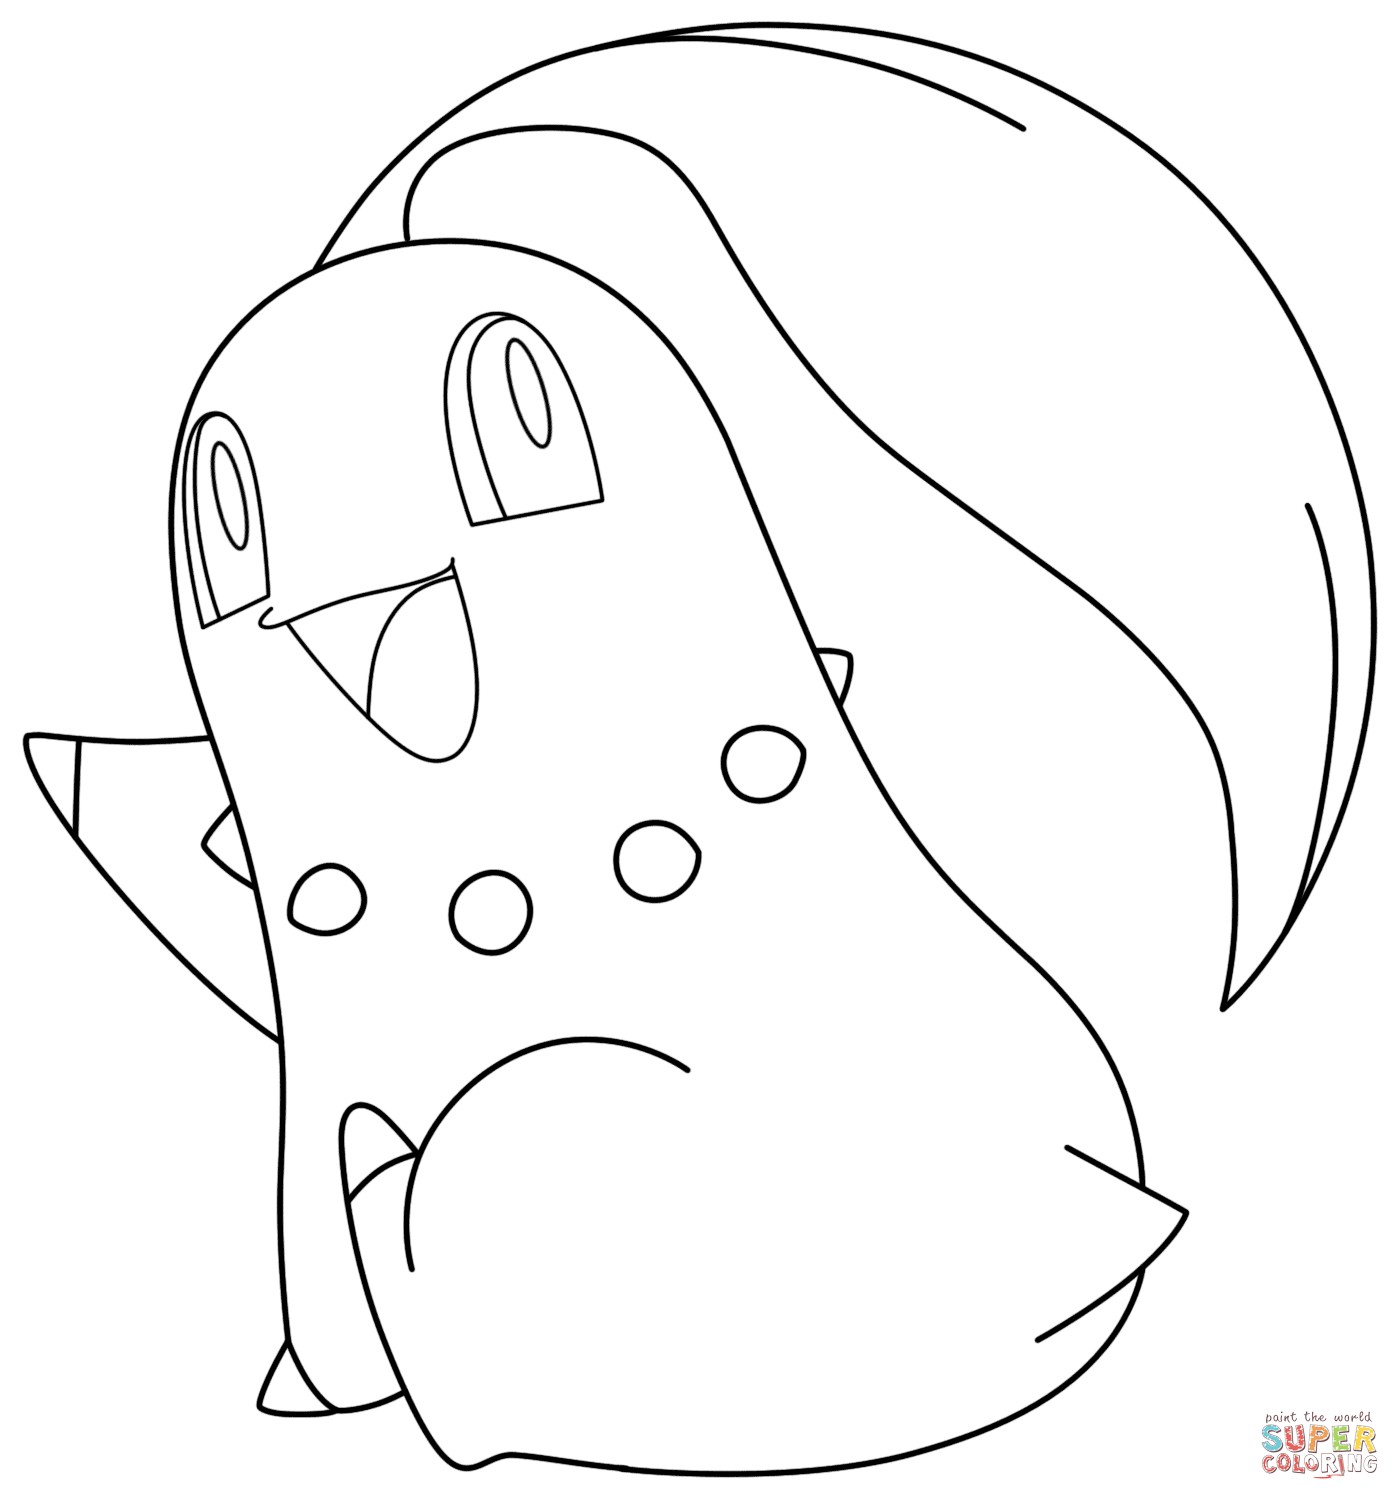 the Chikorita Pokemon coloring pages